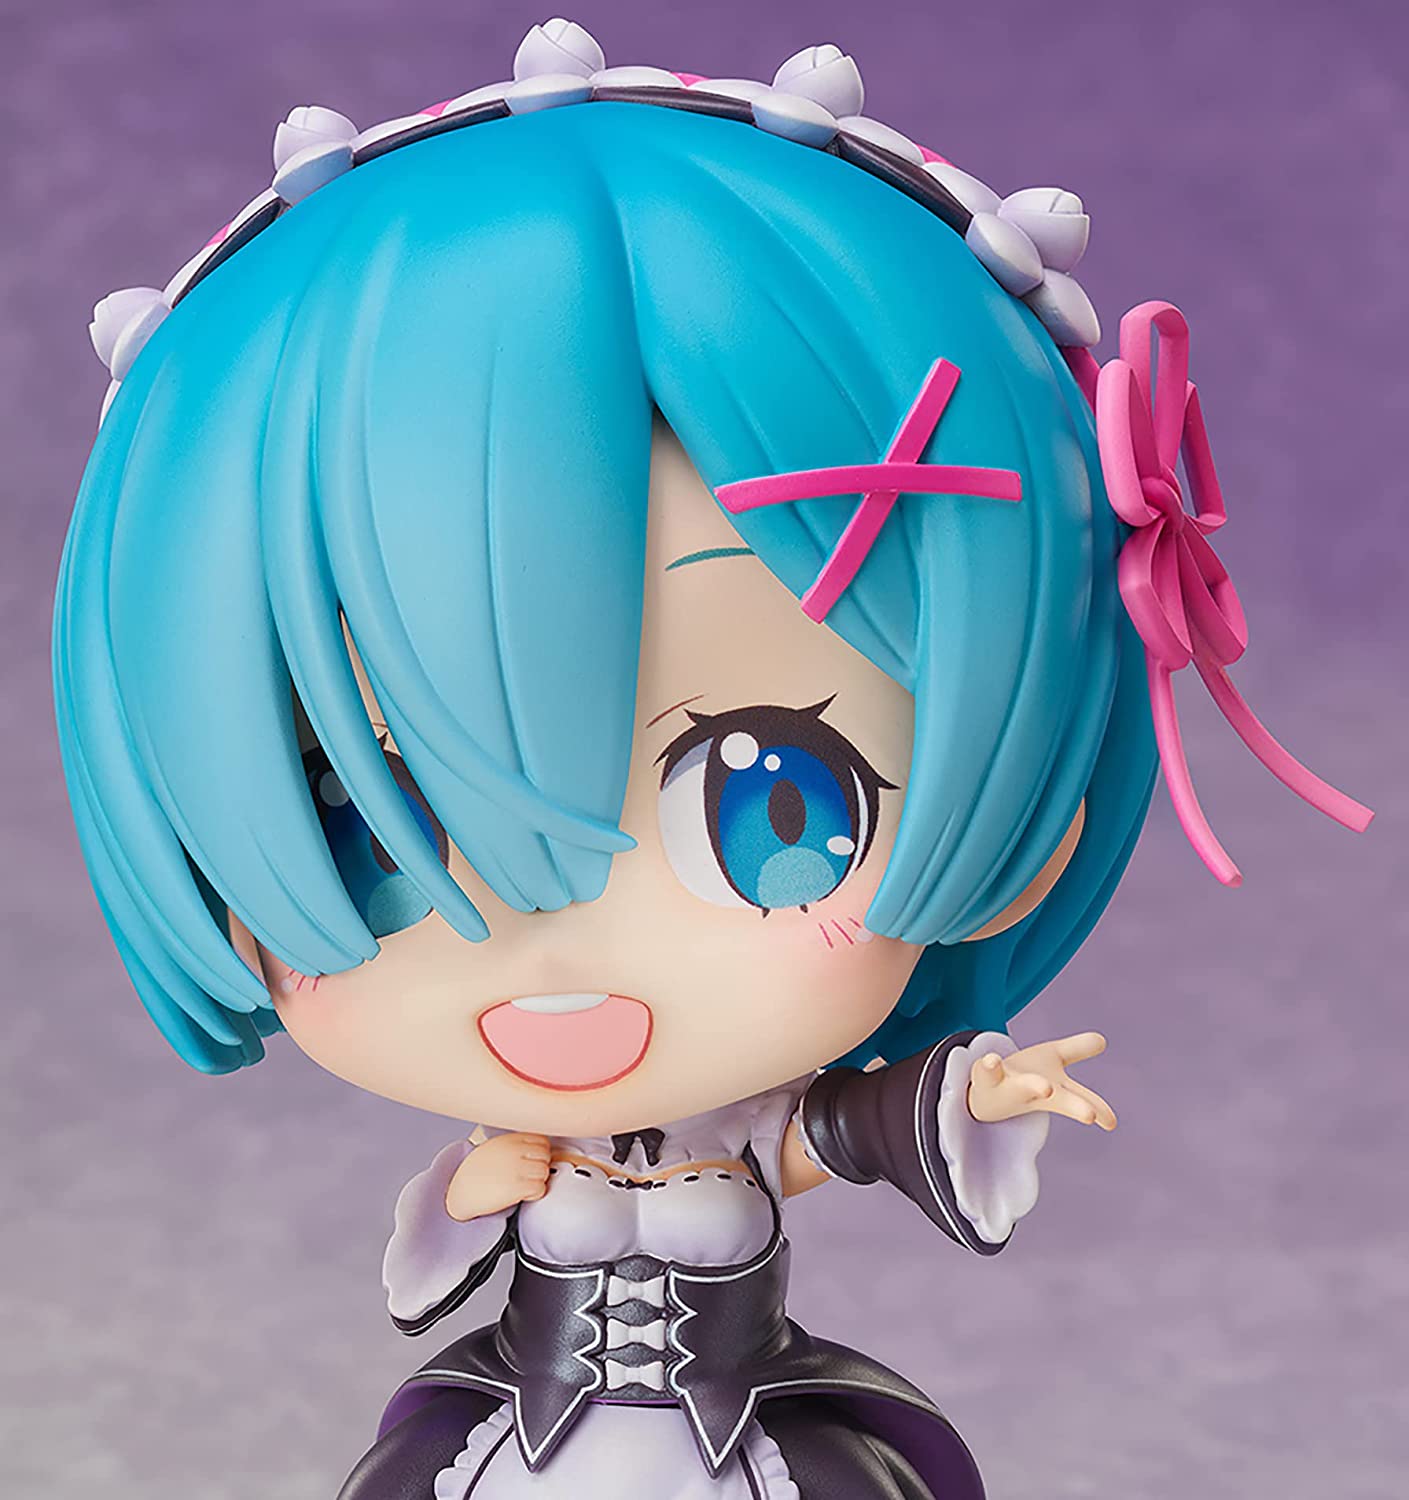 Chouaiderukei Series PREMIUM BIG Re:ZERO -Starting Life in Another World- Rem Coming Out to Meet You Ver. Artistic Coloring Finish Figure | animota